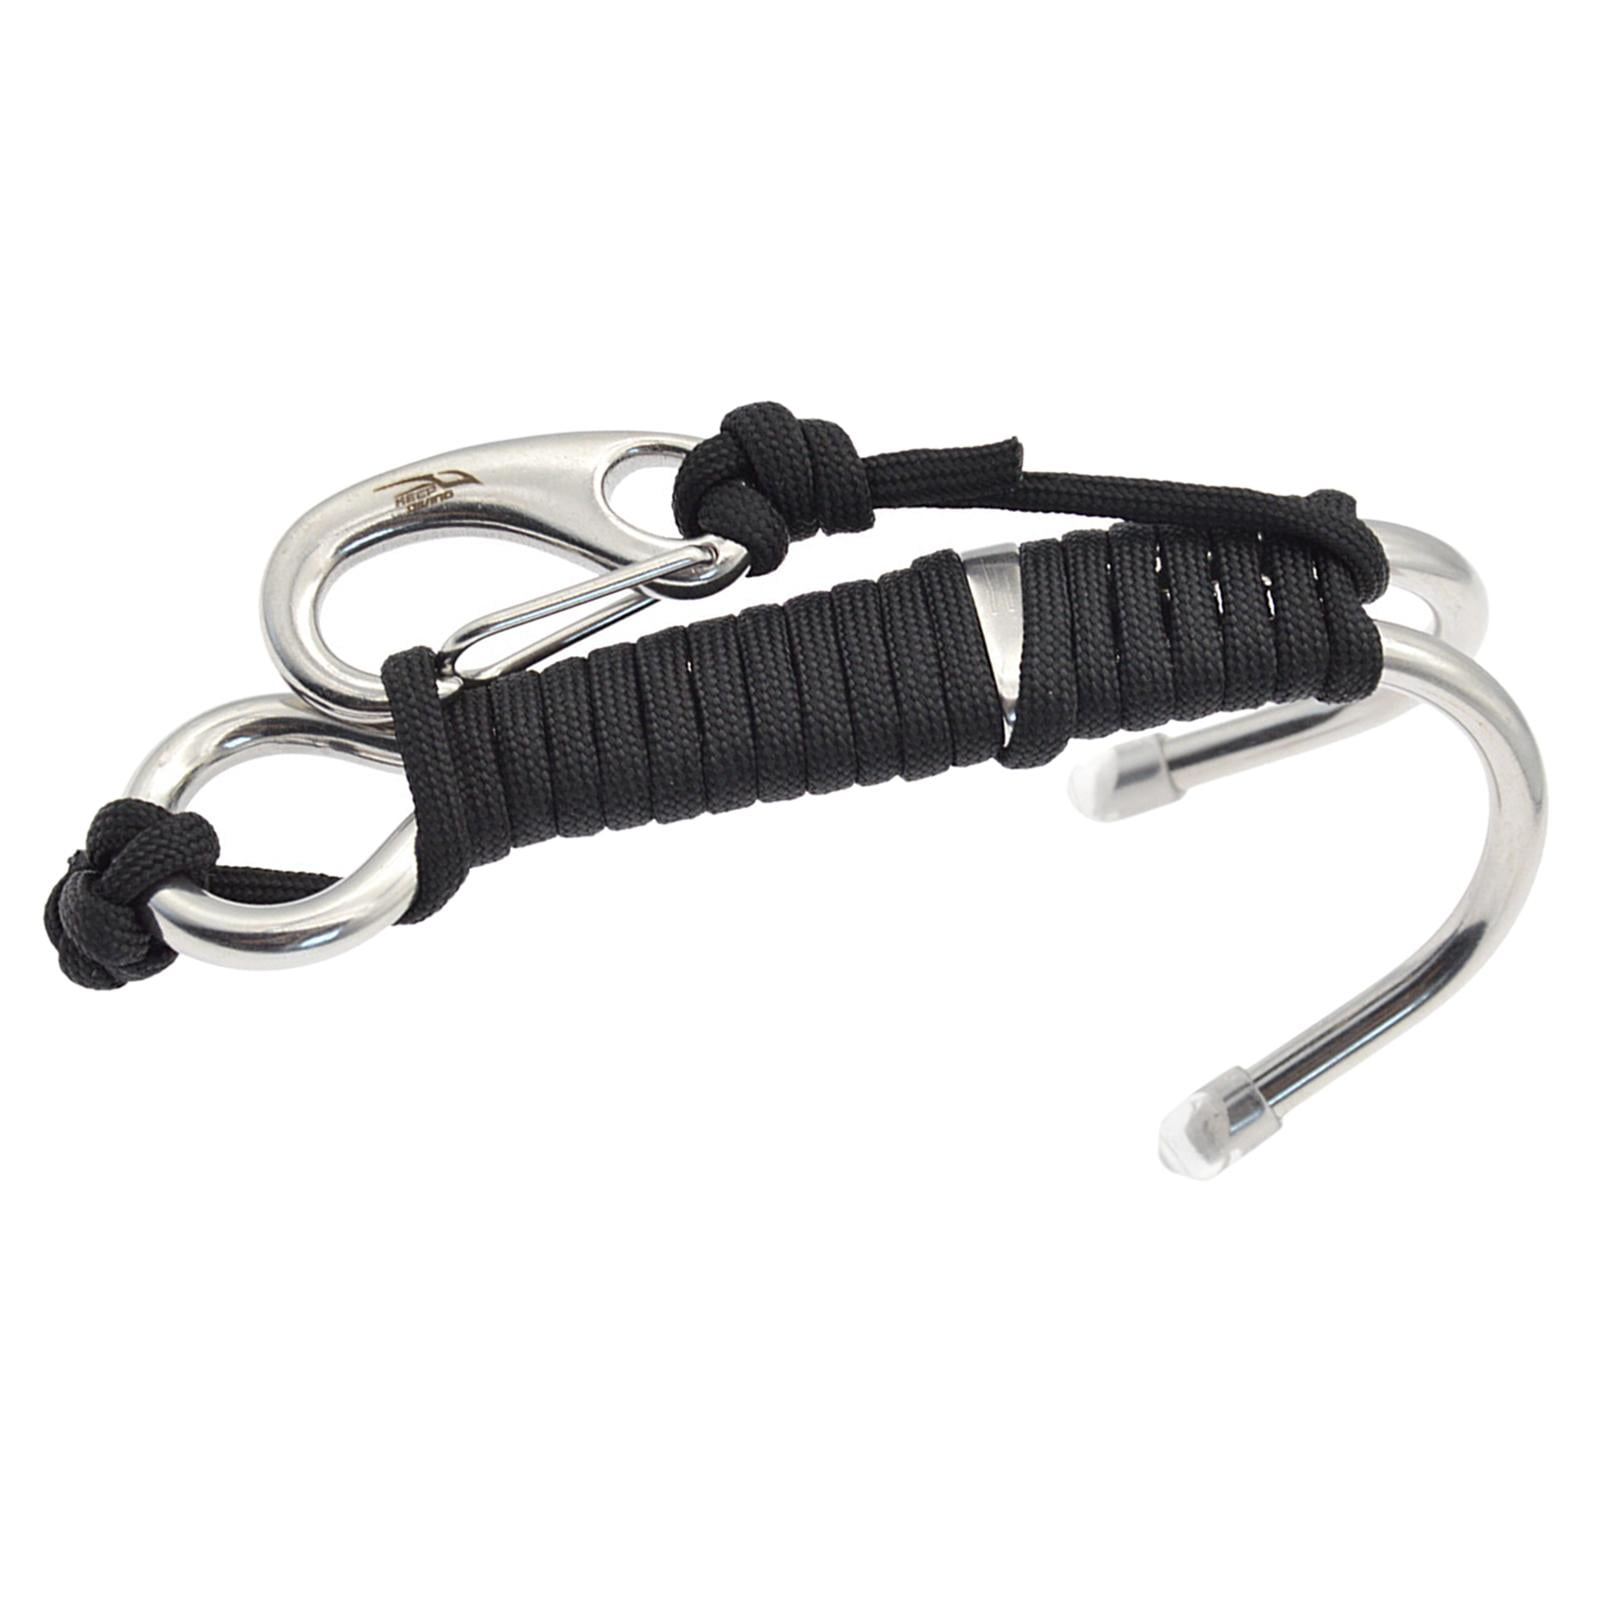 Details about   Scuba Diving Stainless Steel Reef Double Hook with Spiral Coil Lanyard 